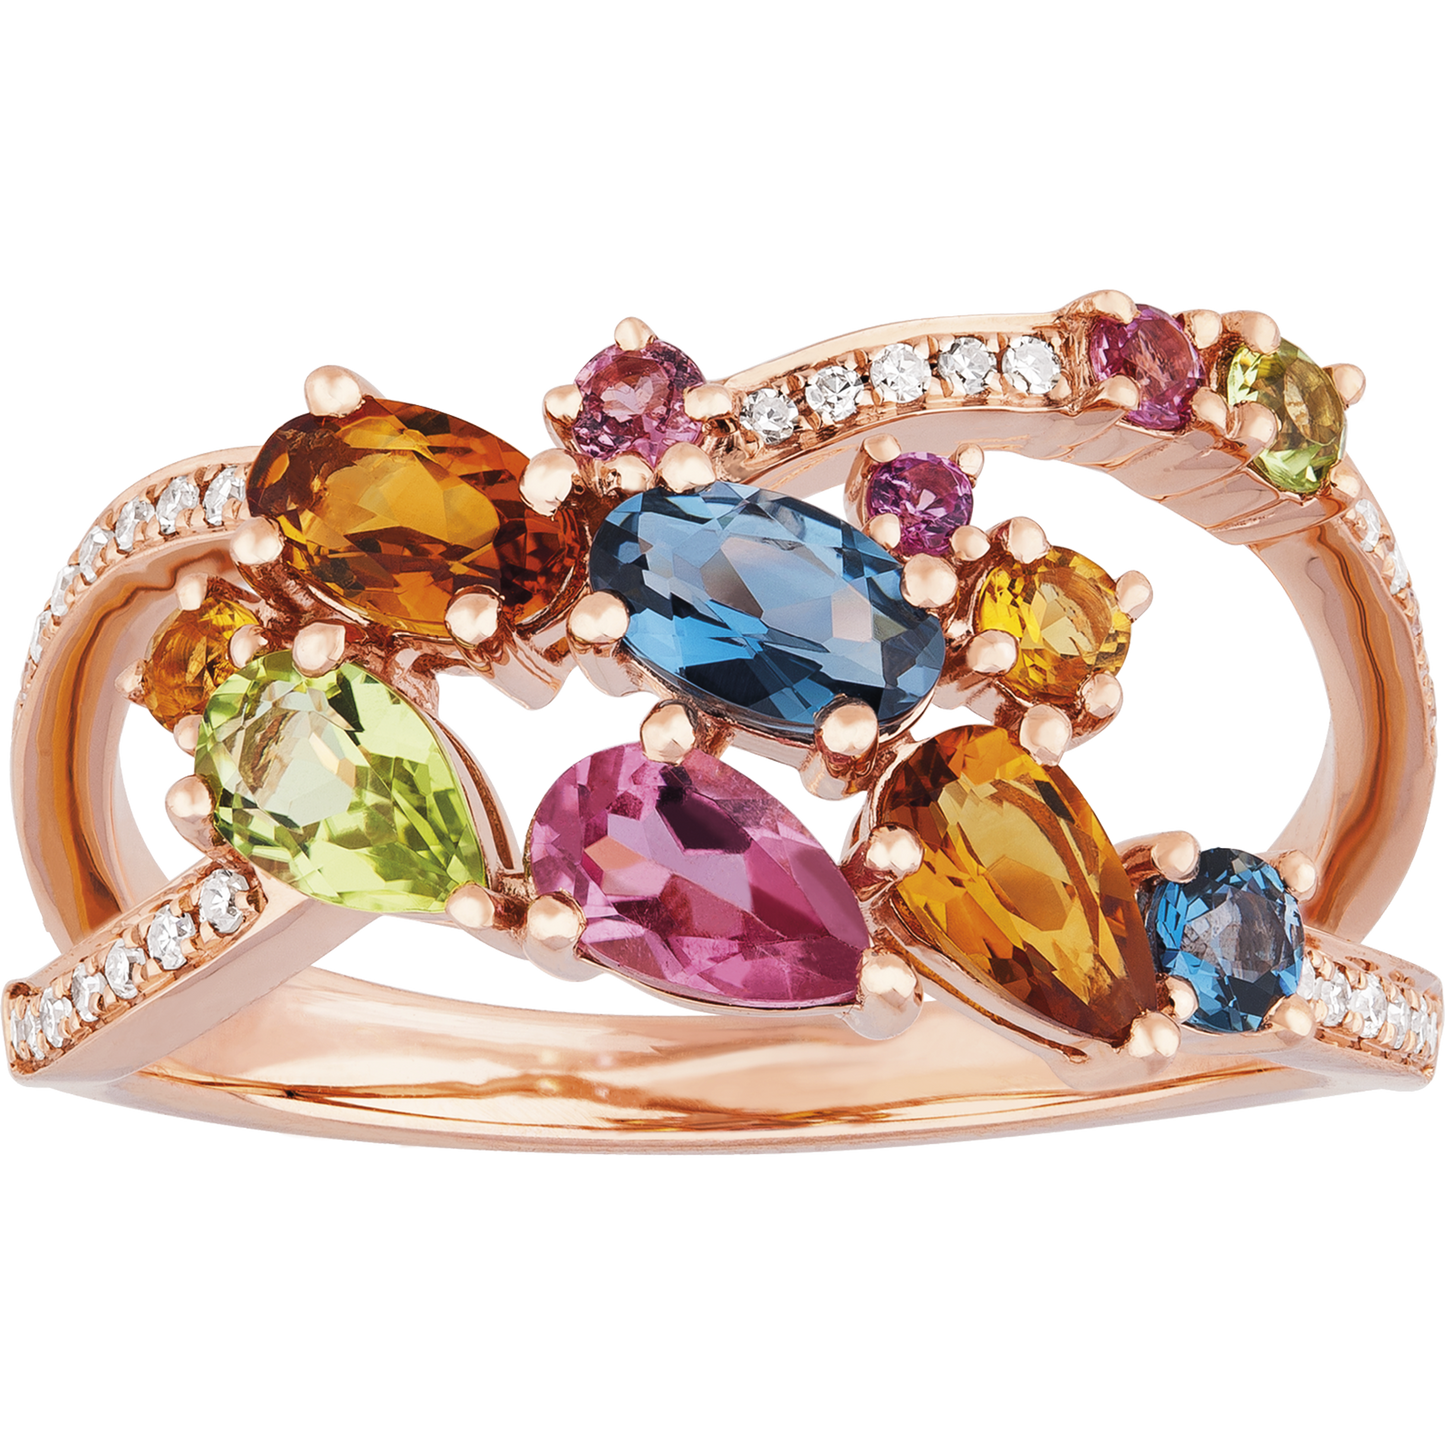 3.38ct Pink Tourmaline, Peridot, London Blue Topaz, Citrine, Pear Cuts, and 0.10ct Diamond Ring in 9ct Rose Gold.